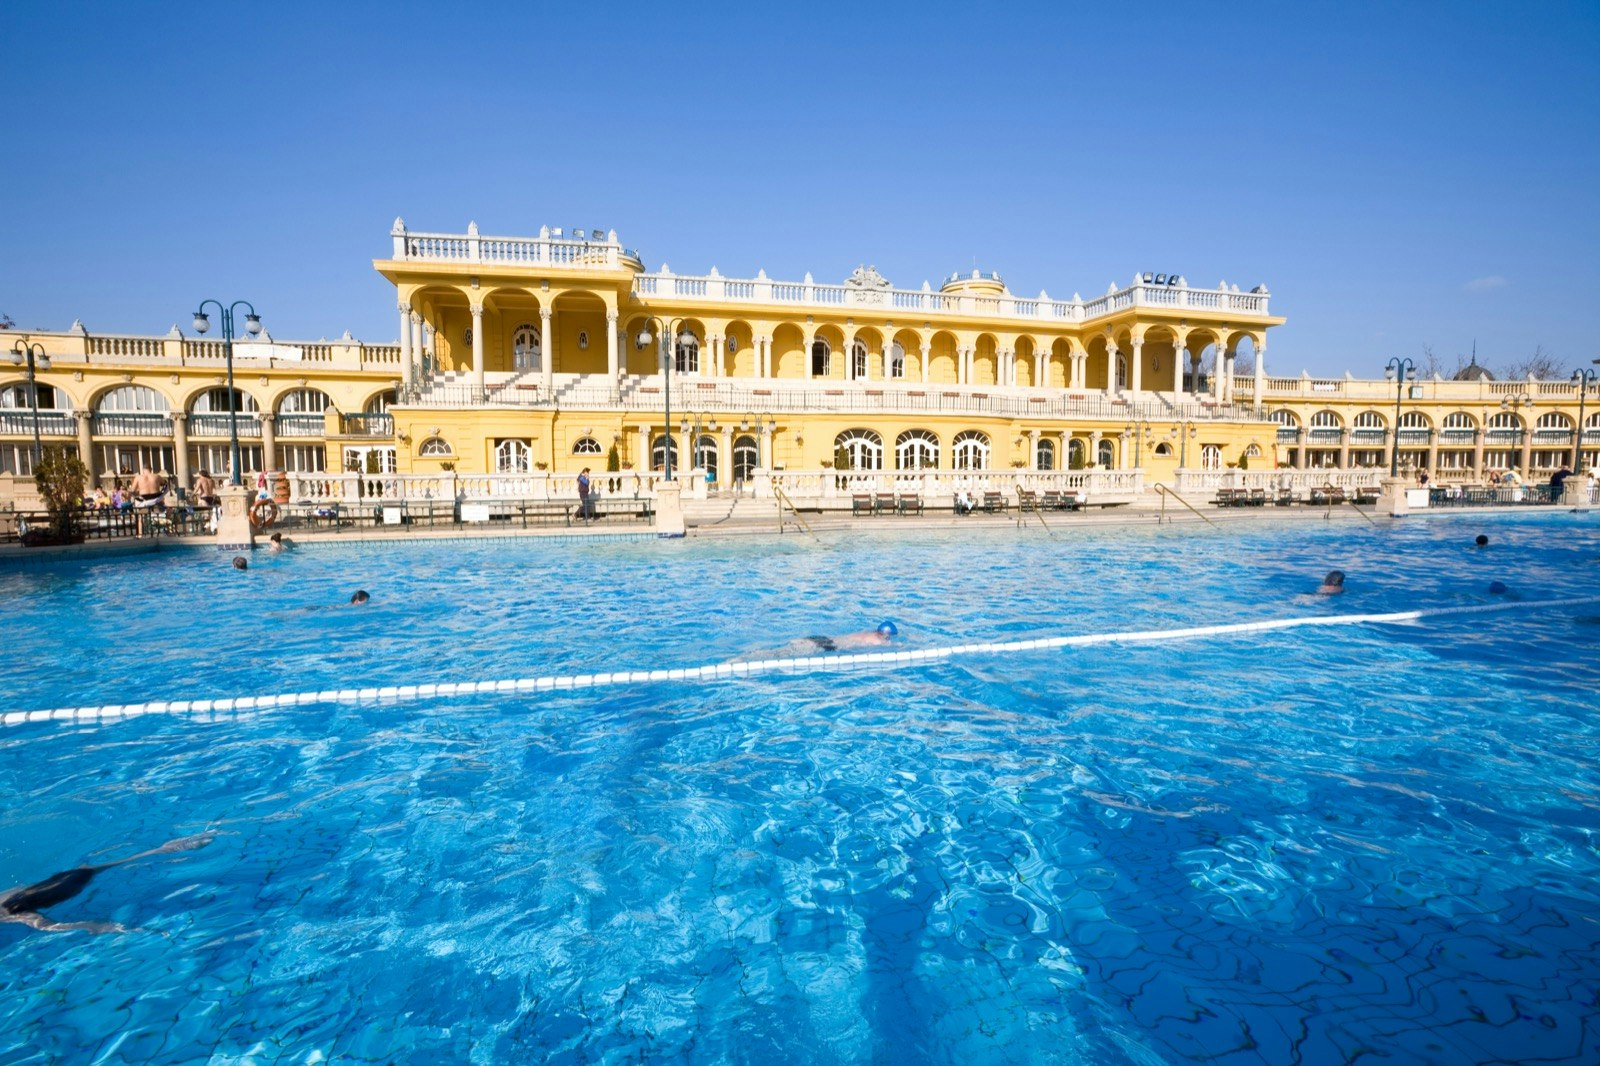 A clear blue swimming pool with an elaborate yellow building in the background